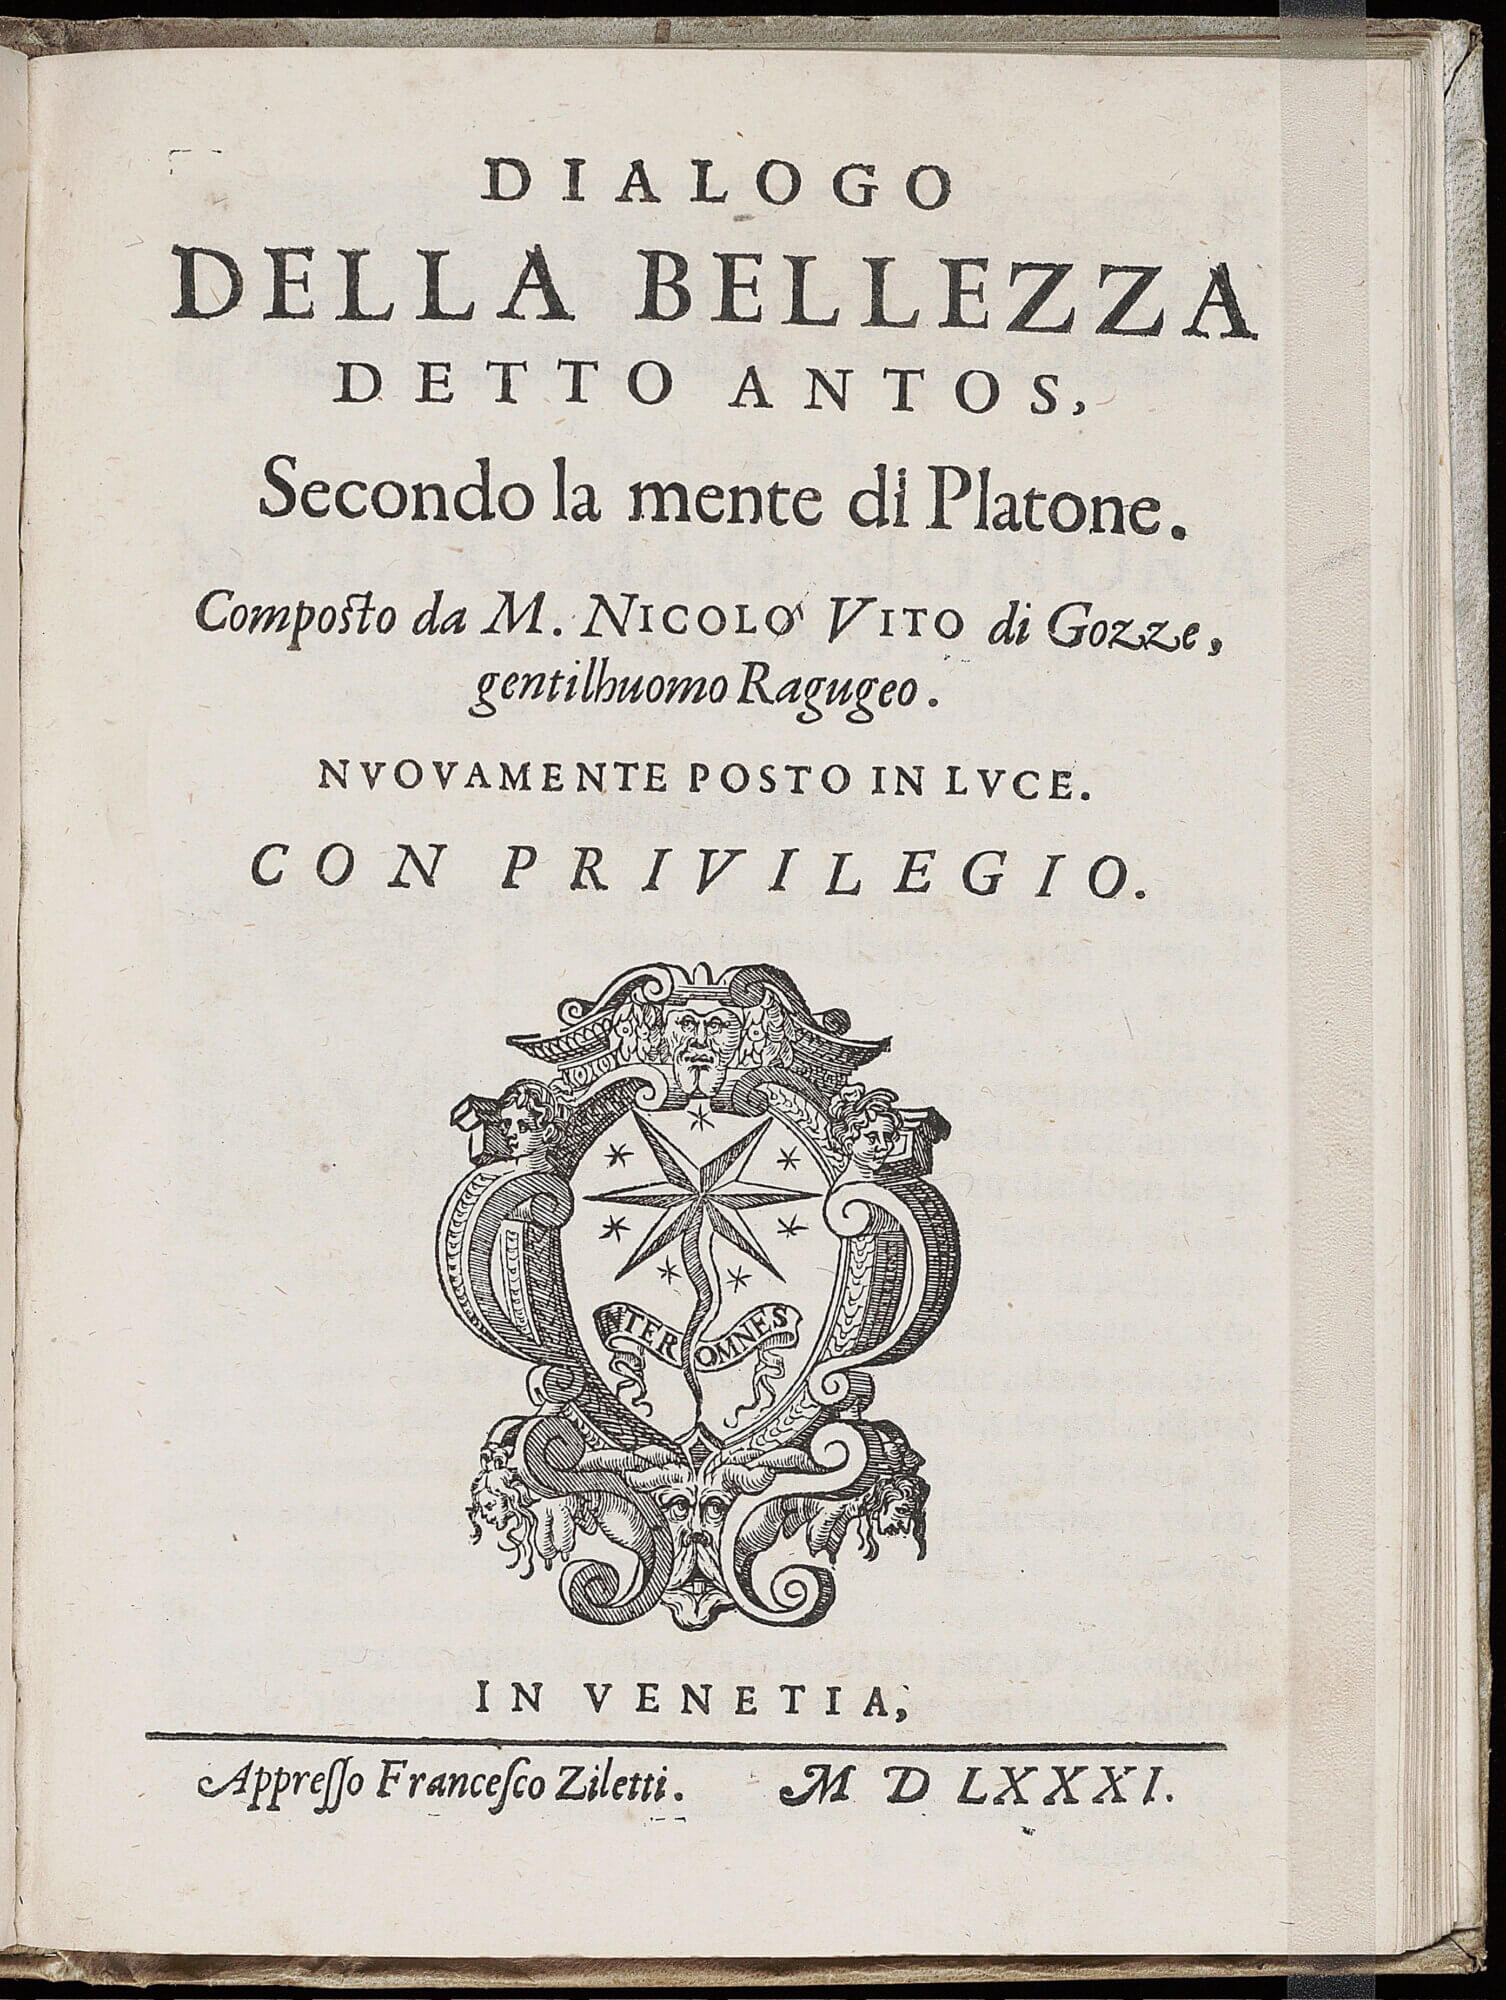 This title page showcases the Ziletti printer’s device, a comet and seven stars with their motto “inter omnes” (“among all”). Here Francesco Ziletti uses the device of his uncle, Giordano Ziletti, but with his own spin -- most noticeably, the inclusion of two upside-down topless women who were not present in Giordano's works.